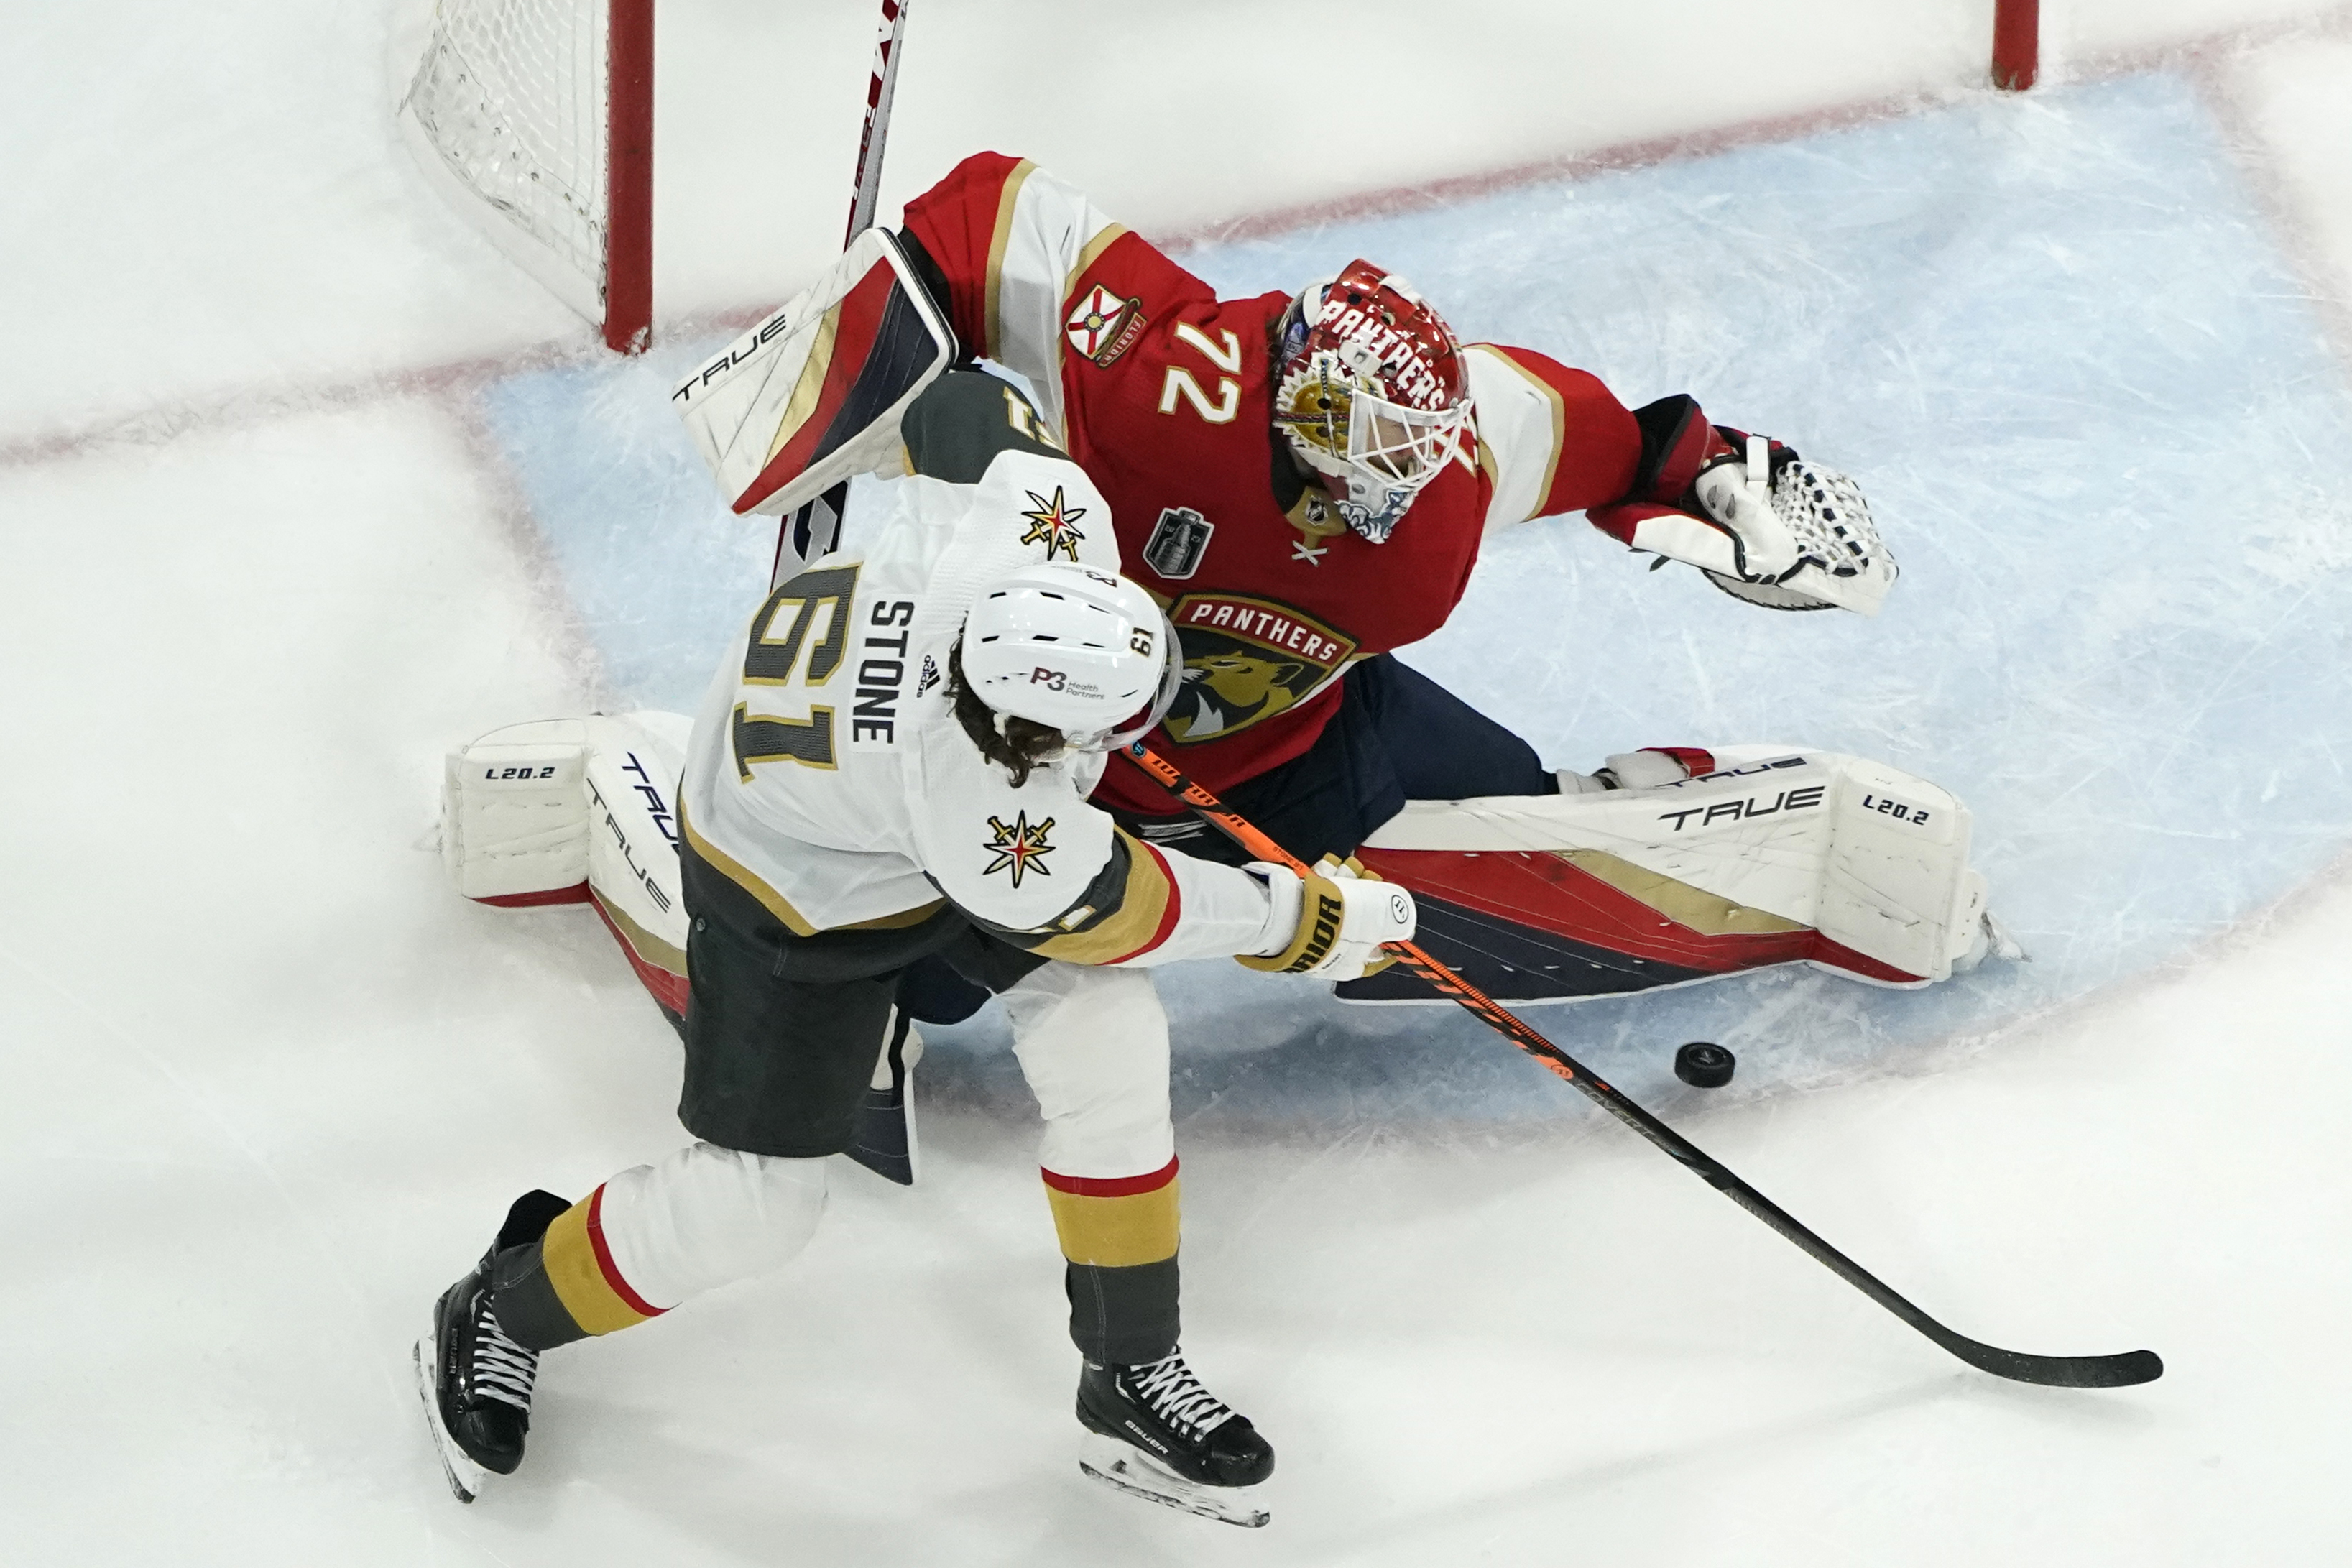 Vegas Golden Knights buck trend of small D-men during Stanley Cup Final run  - The San Diego Union-Tribune